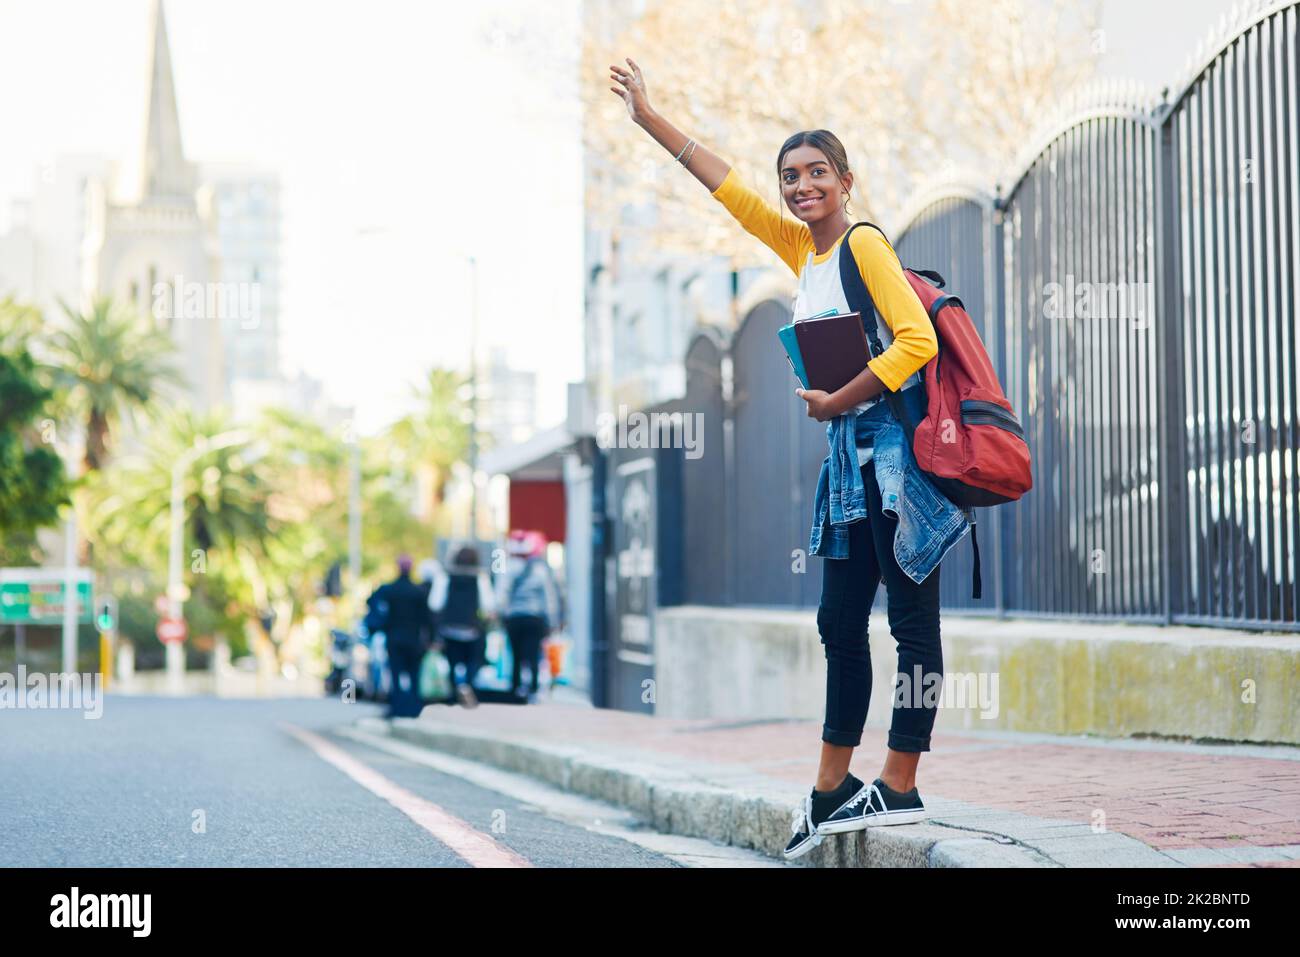 Got to catch a cab on my way to college. Shot of a young female student commuting to college in the city. Stock Photo